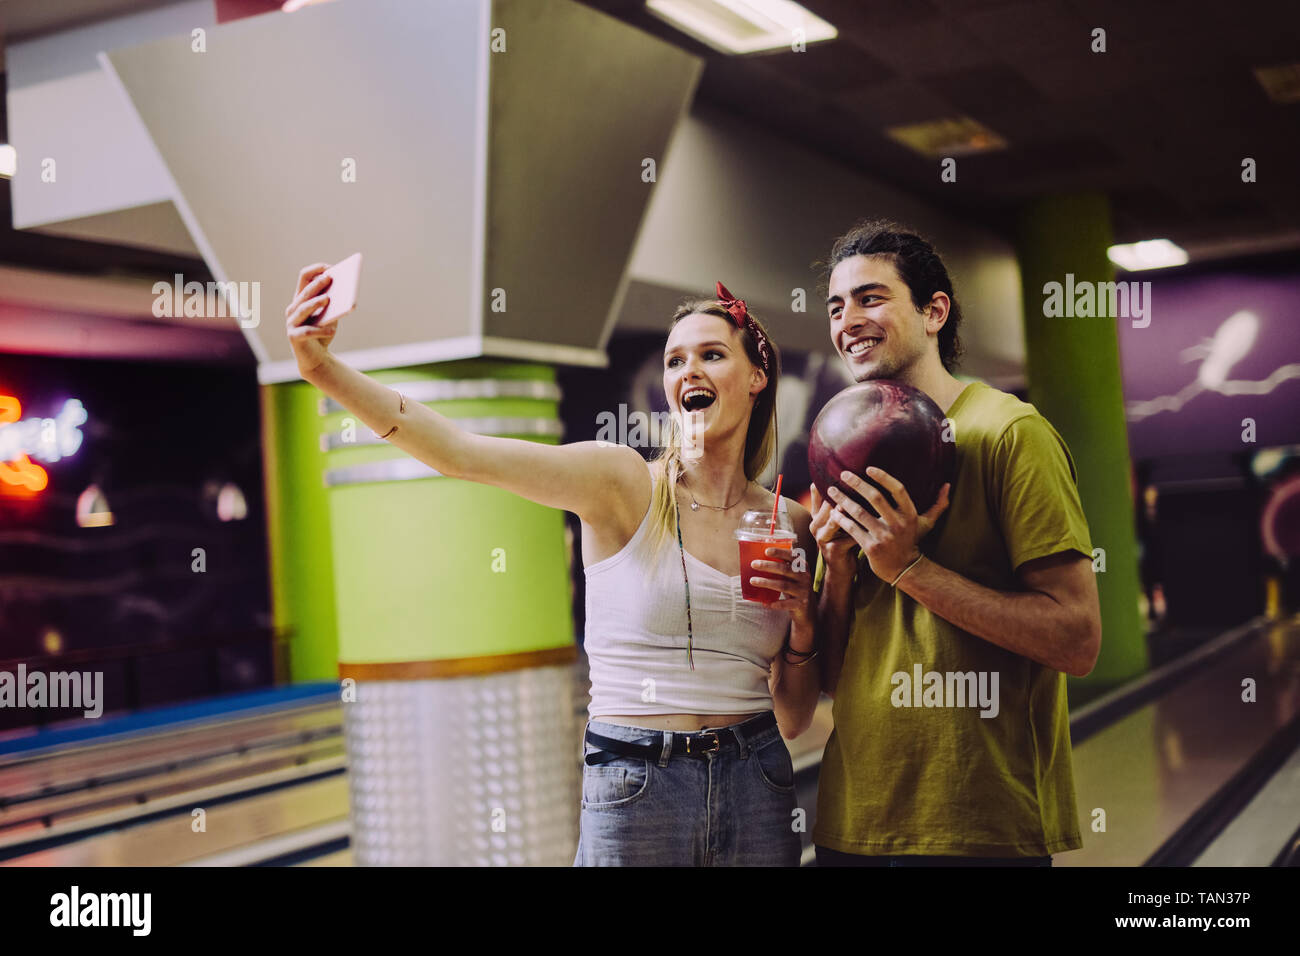 Couple taking selfie at bowling alley. Woman holding a softdrink taking selfie with man holding a ball. Stock Photo